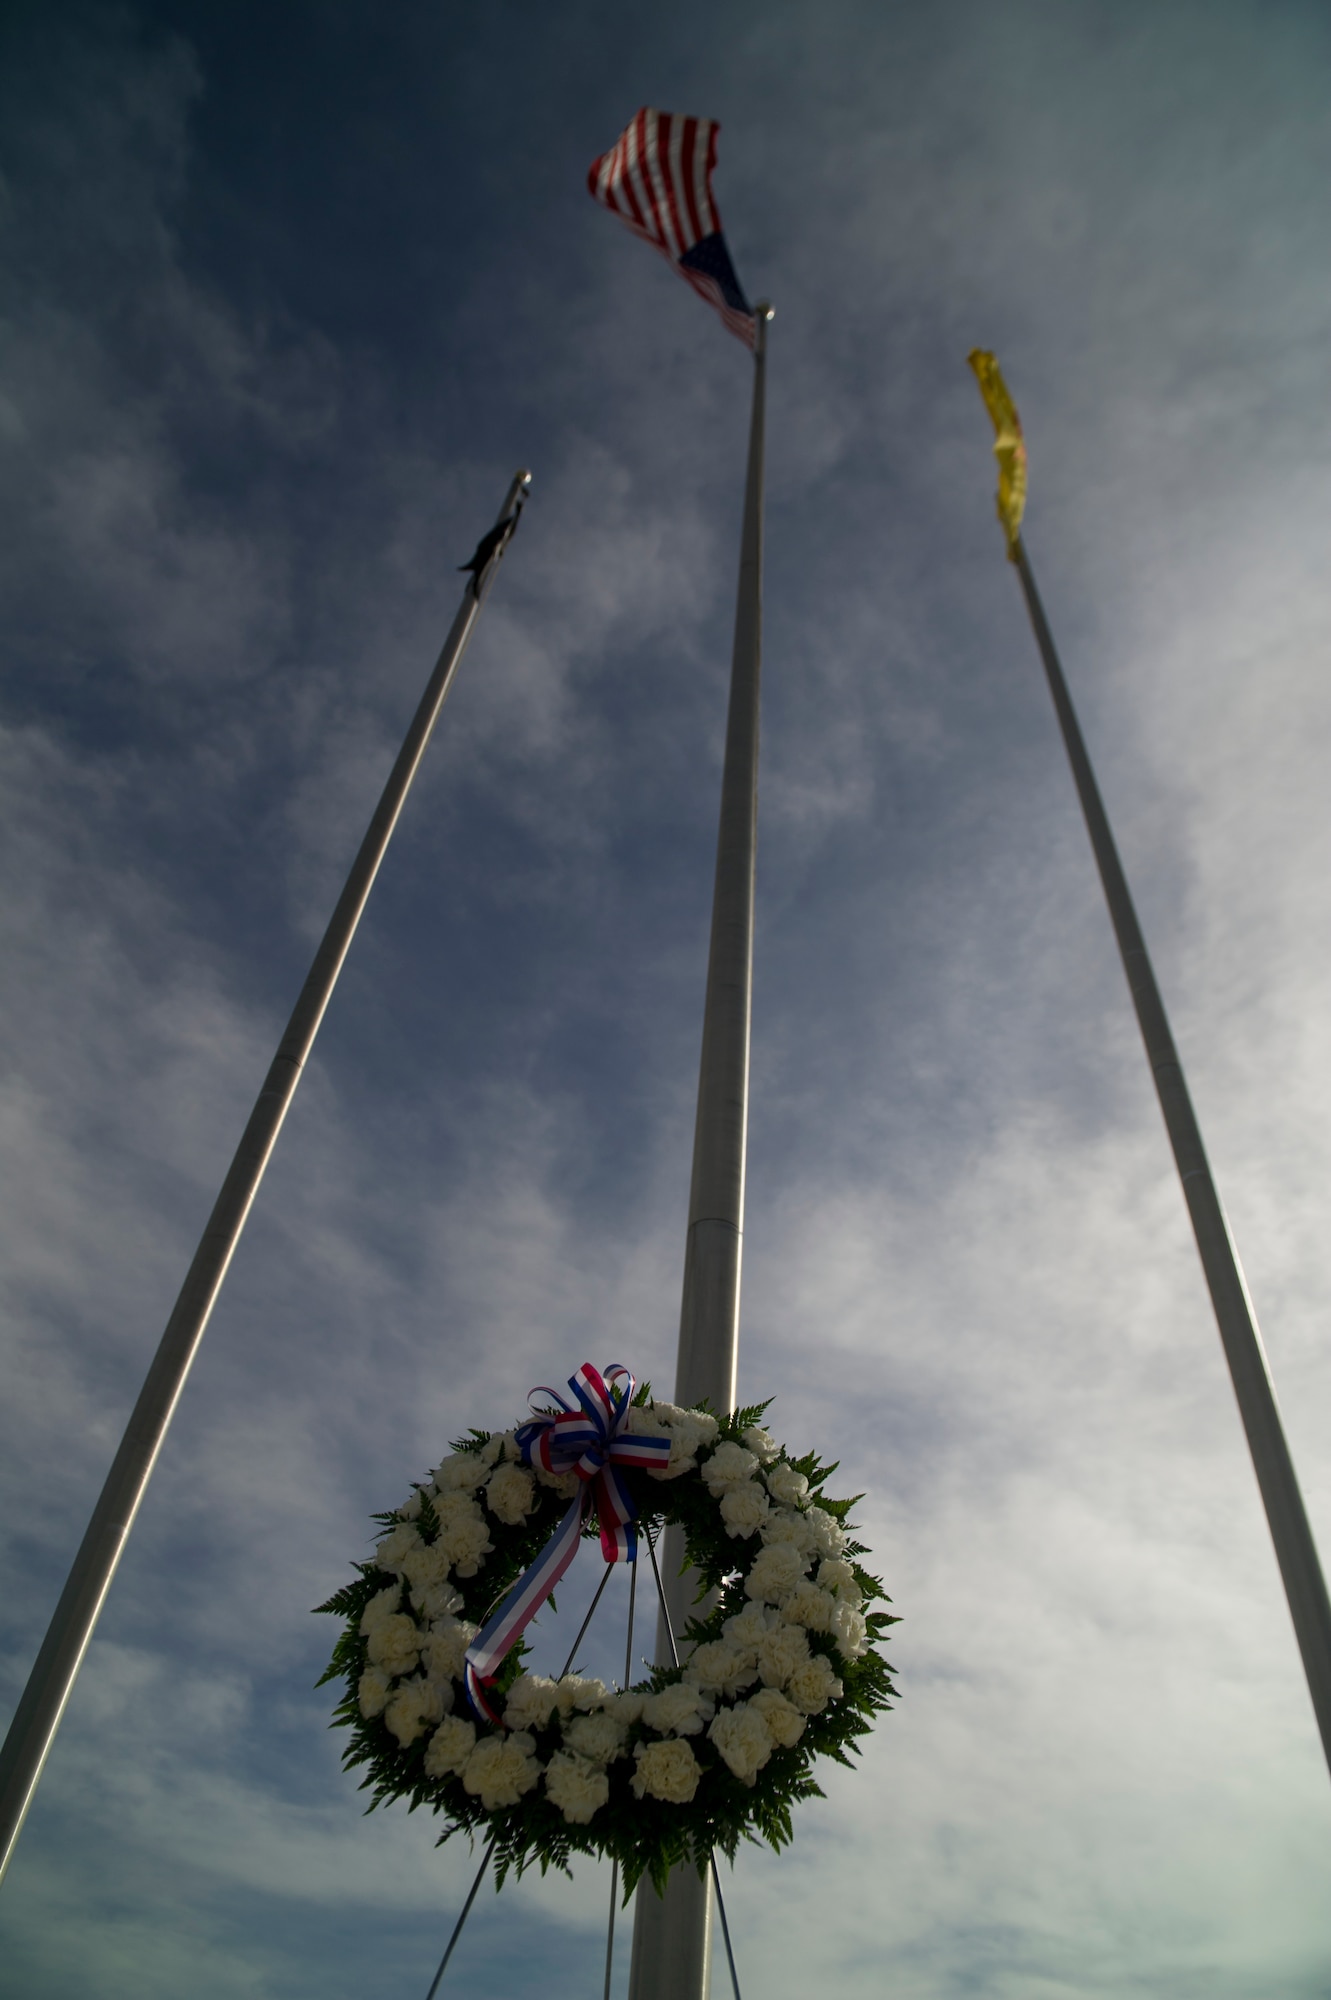 A wreath is displayed below the U.S. flag in honor of fallen law enforcement heroes during the Police Week closing ceremony at Holloman Air Force Base, N.M., May 16. According to the National Police Week website, President John F.  Kennedy signed a proclamation in 1962 that designated May 15 as Peace Officers Memorial Day and the week in which that date falls as National Police Week. Since the inception of National Police Week, the United States Air Force has lost 120 military and civilian law enforcement officers. (U.S. Air Force photo by Airman 1st Class Aaron Montoya / Released)